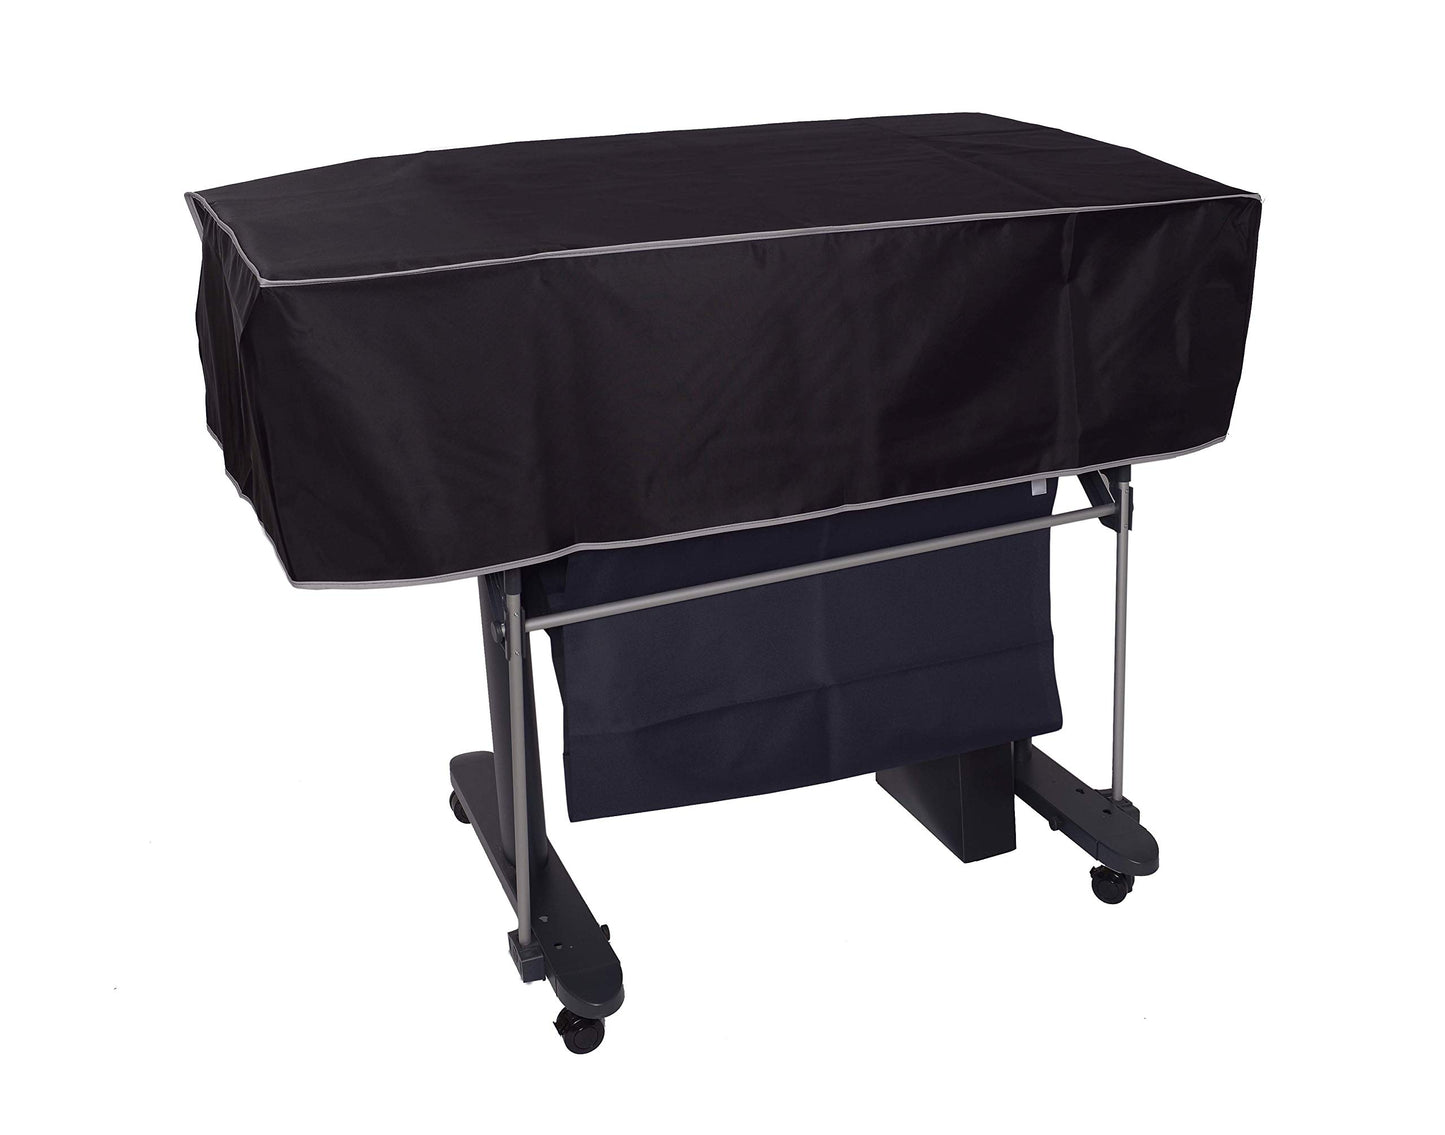 The Perfect Dust Cover, Black Nylon SHORT Cover for Epson SureColor T3475 24'' Large Format Inkjet Printer, Anti Static Waterproof Cover, Dimensions 43''W x 30''D x 20''H by The Perfect Dust Cover LLC